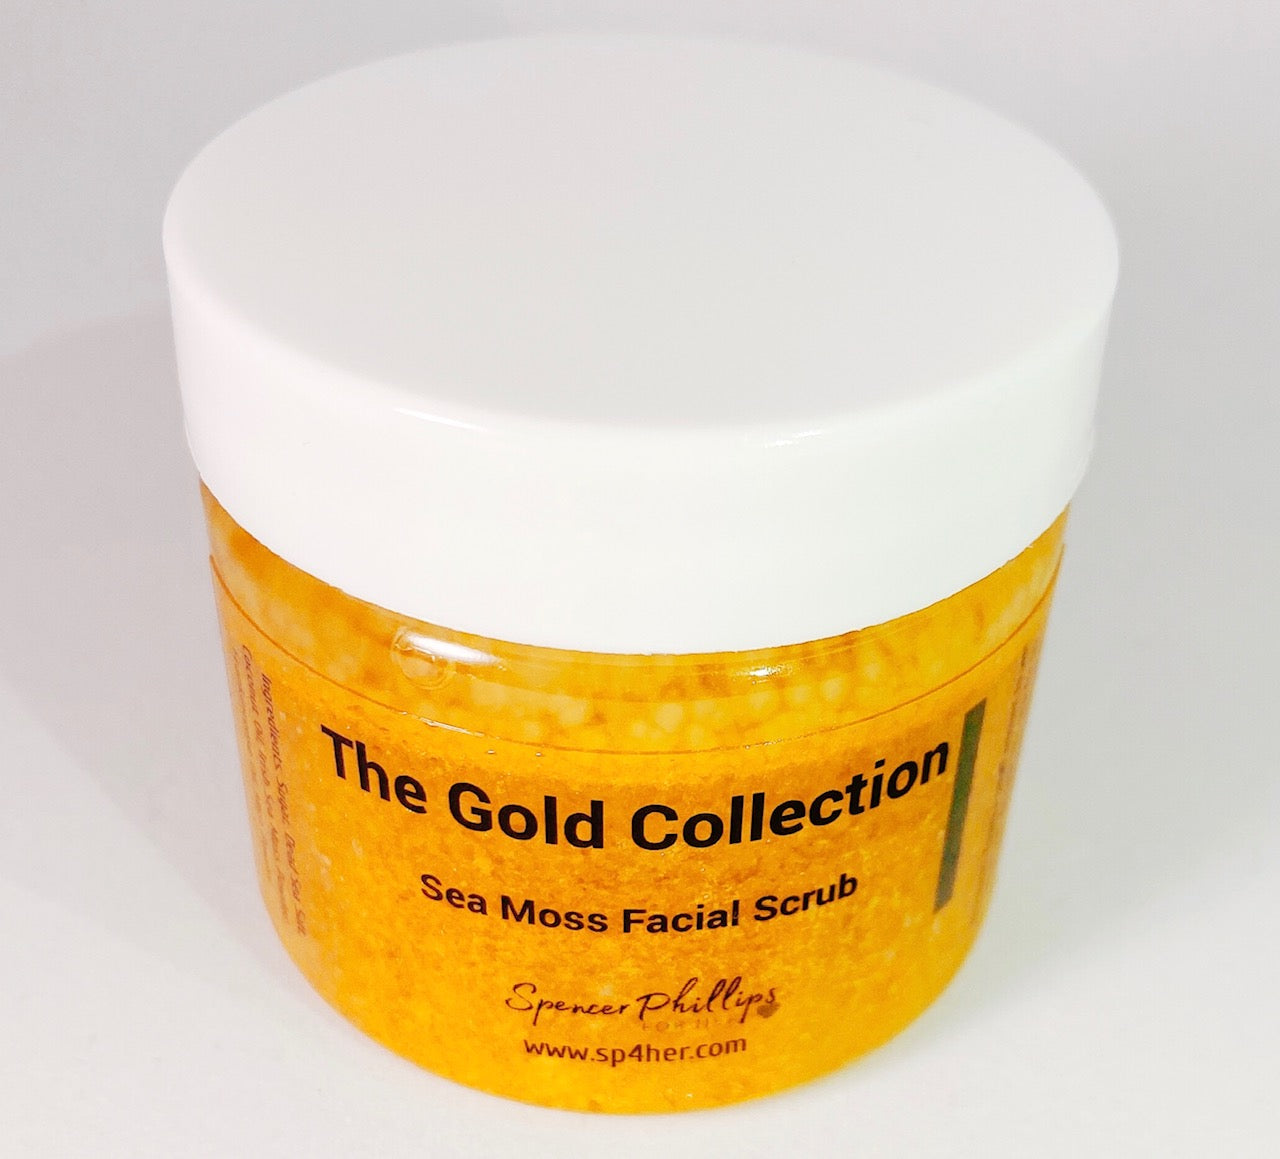 The Golden Sea Moss Collection